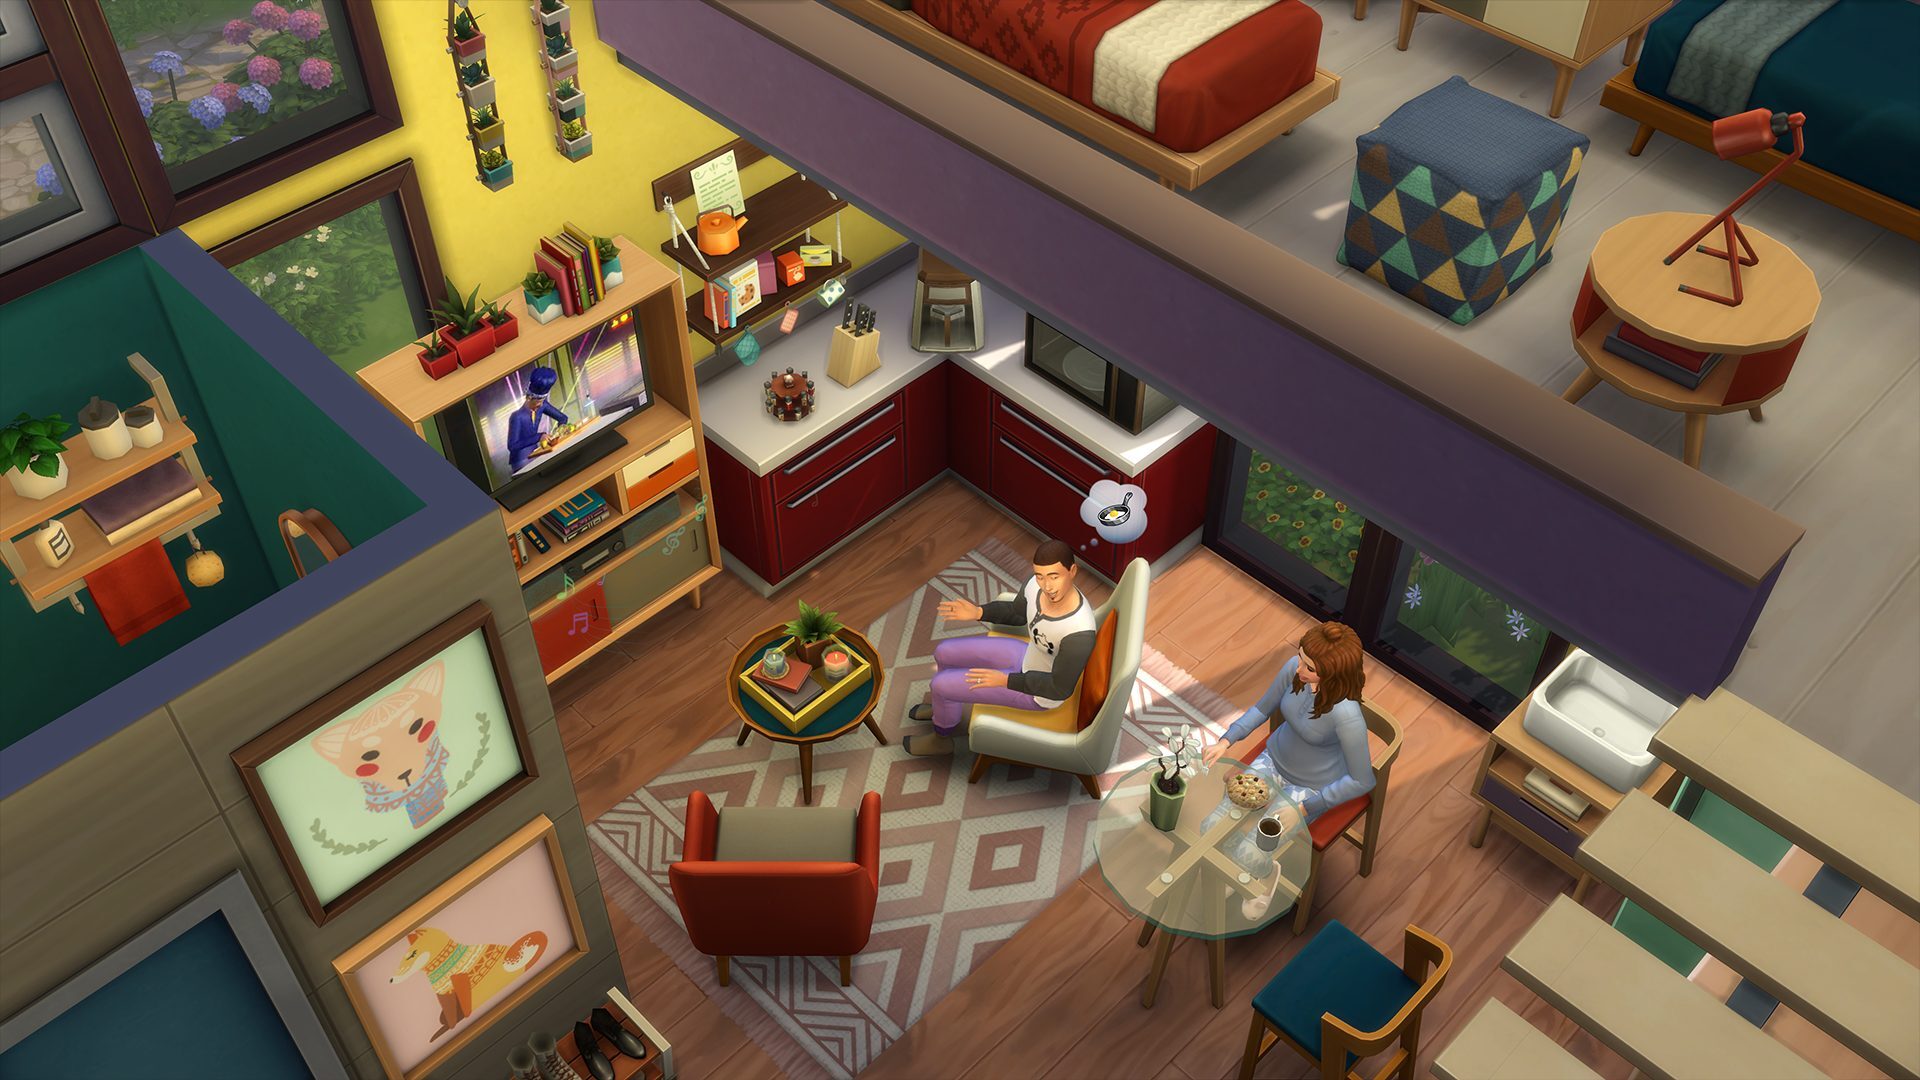 You can now Build a Bundle with The Sims 4 Tiny Living on Origin